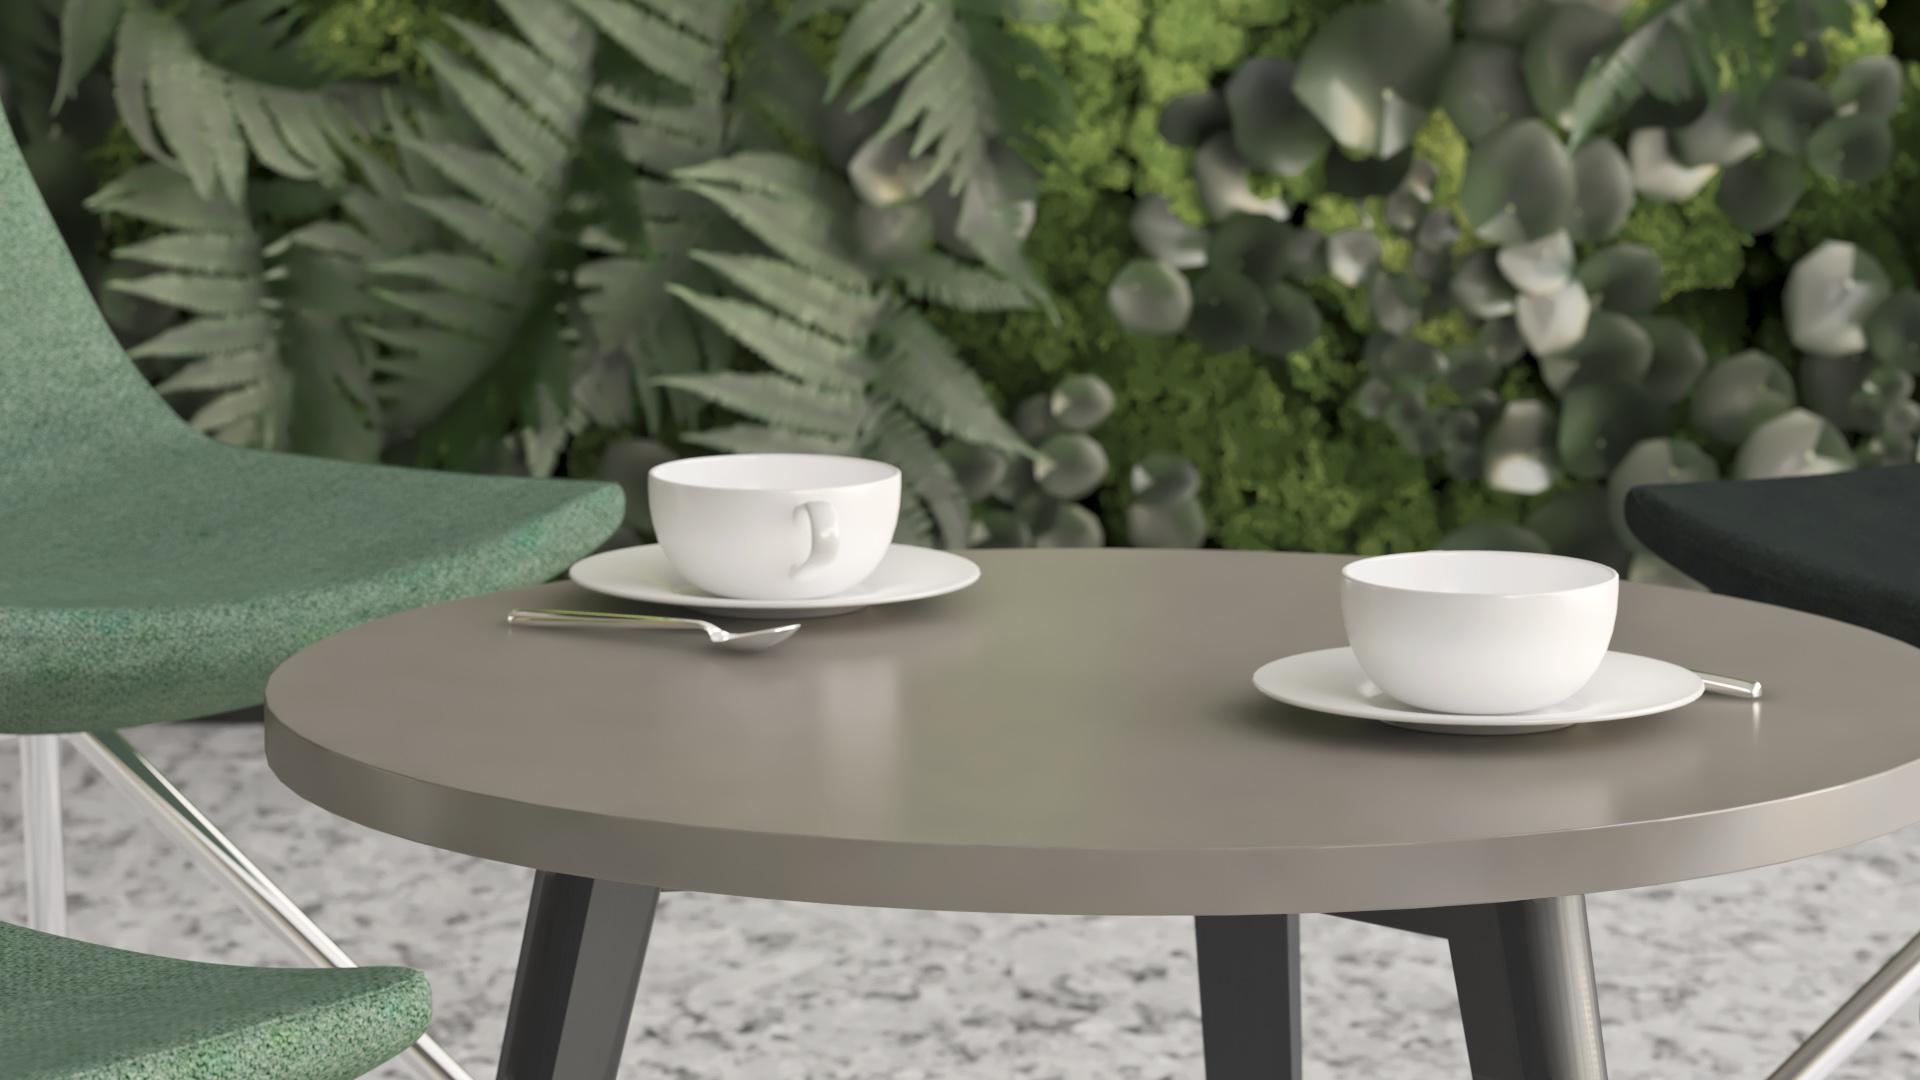 Nova Wood occasional table in black and cubanit grey